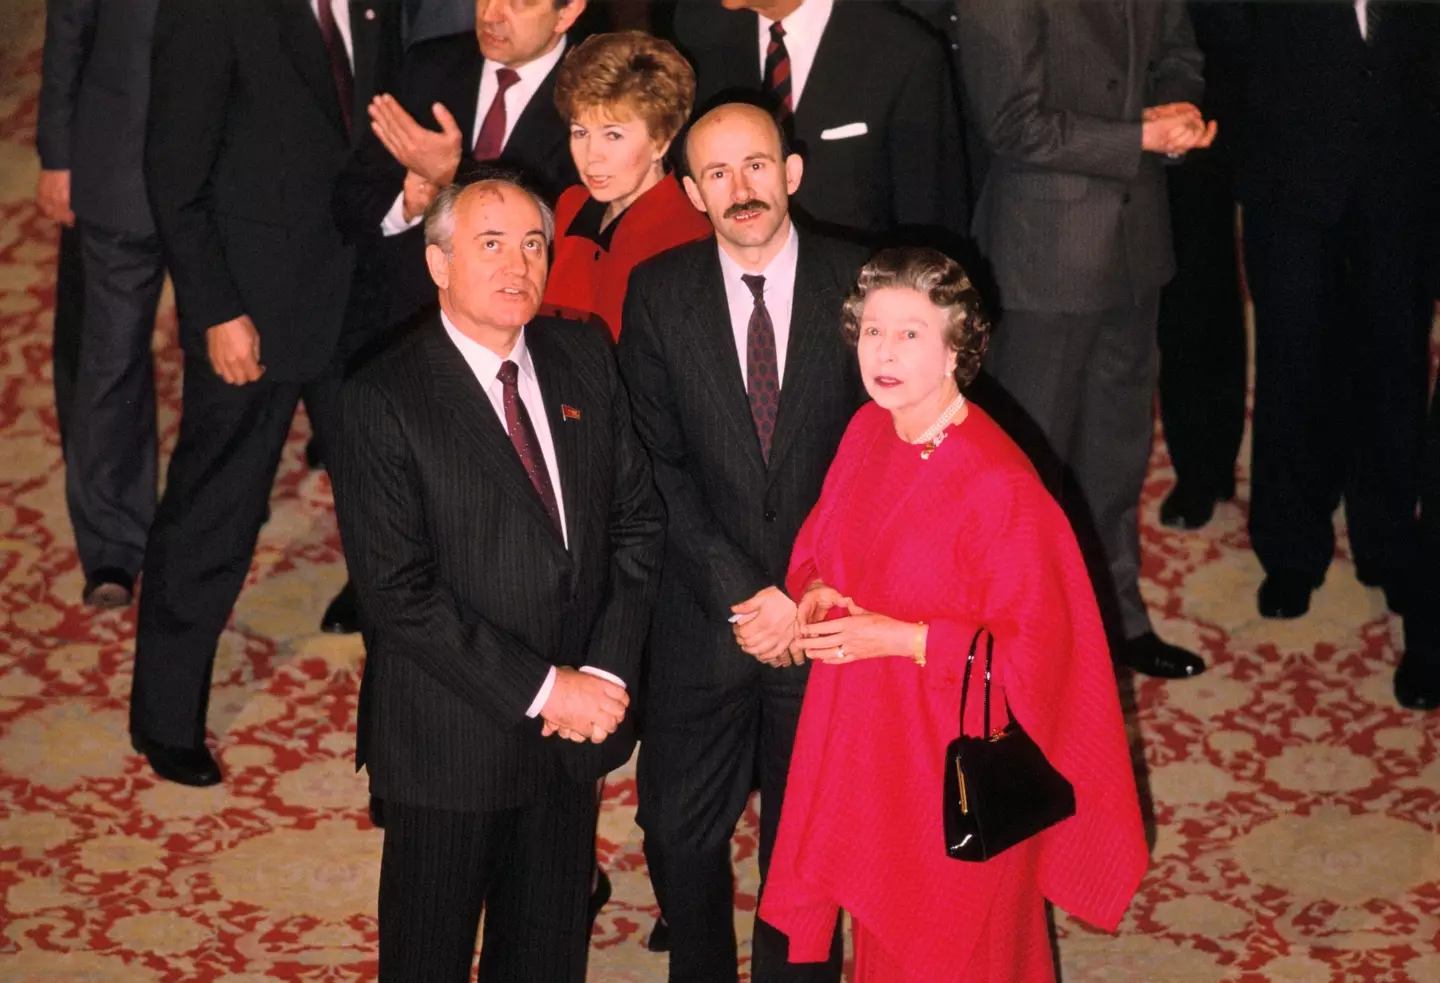 The Queen pictured in 1989. [